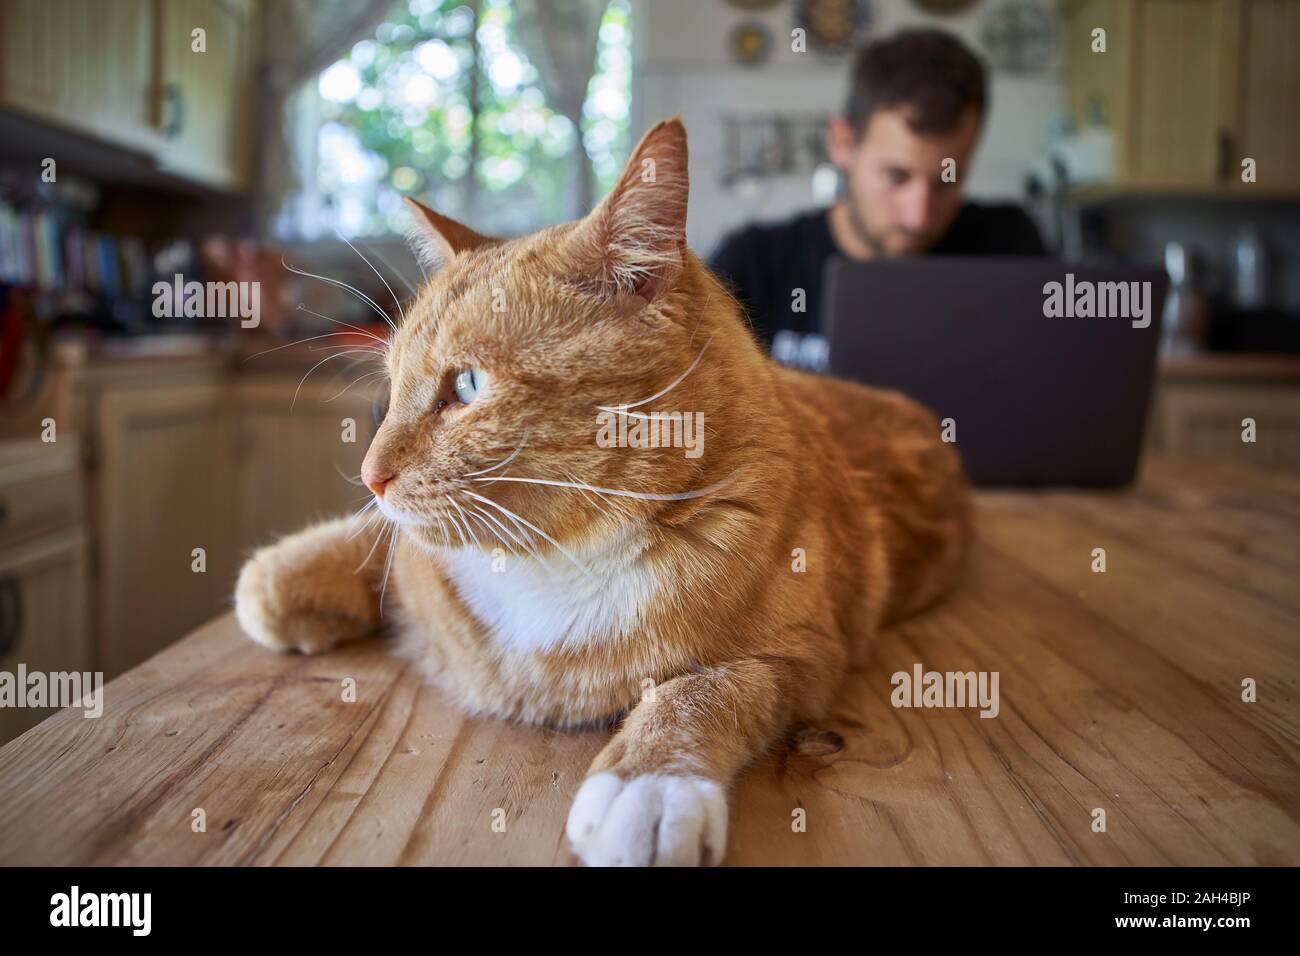 Ginger cat lying on kitchen table, while man is using laptop Stock Photo